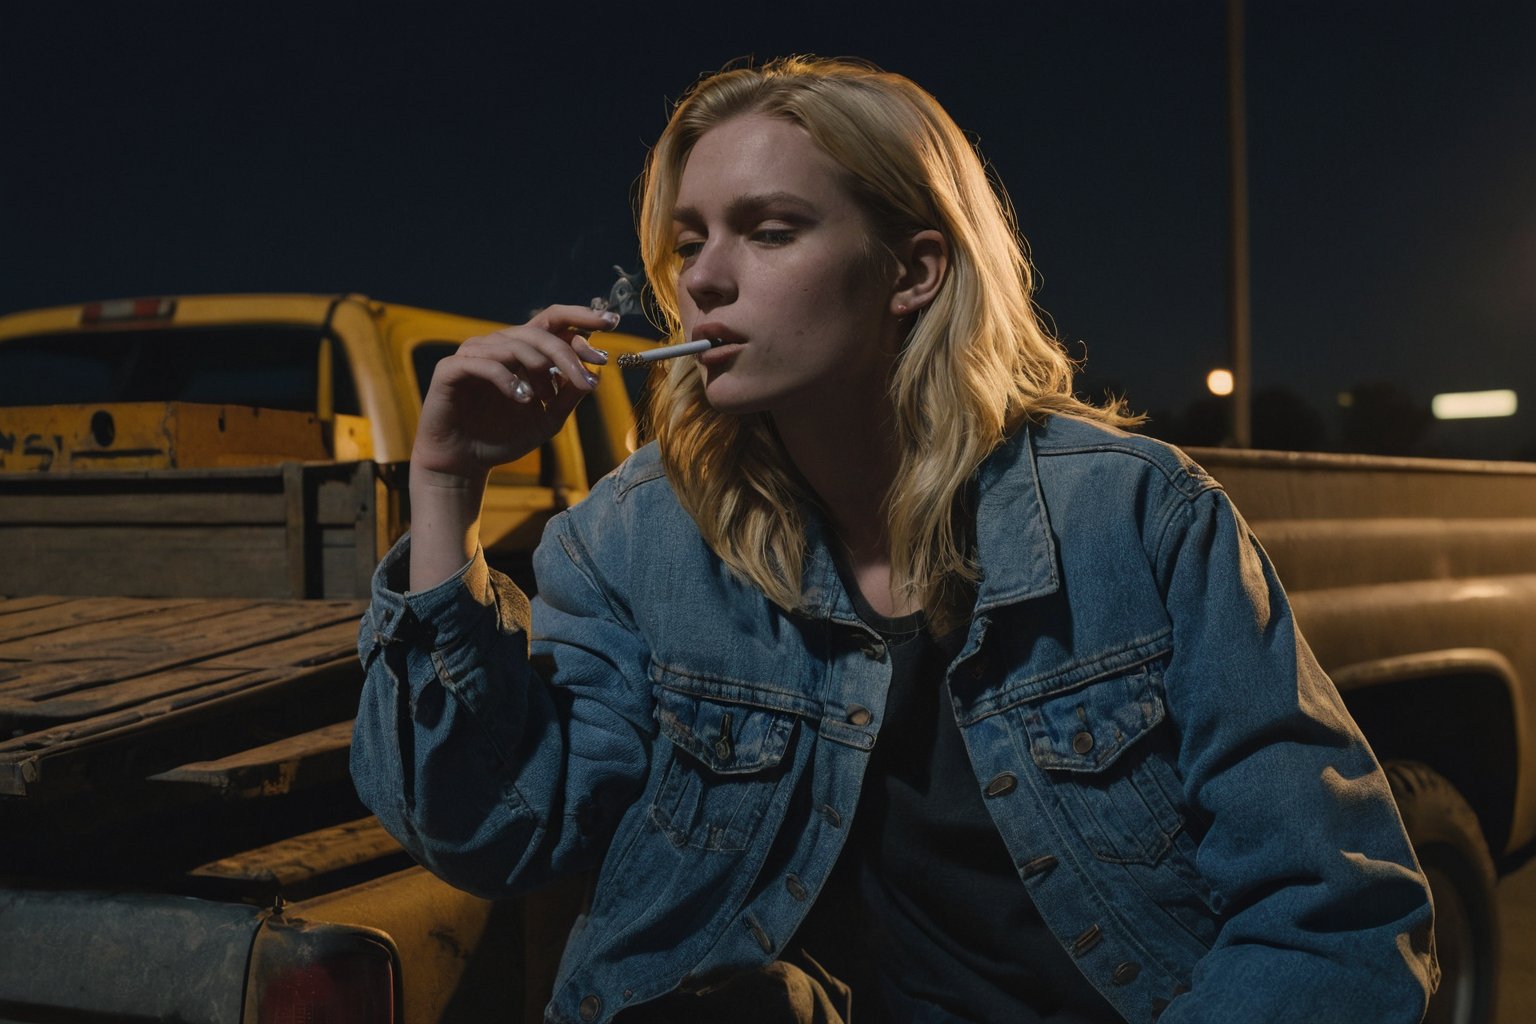 Closeup of a blonde young woman smoking a cigarette sitting on the back of a dusty pickup truck in a dimly lit parking lot at night. She is holding the cigarette with her hand. Her outfit consists of a denim jacket. The truck's tailgate is down, revealing a jumble of boxes and crates. The atmosphere is moody and mysterious, with the yellow glow of the streetlight casting long shadows and reflecting off the truck's metal surface.